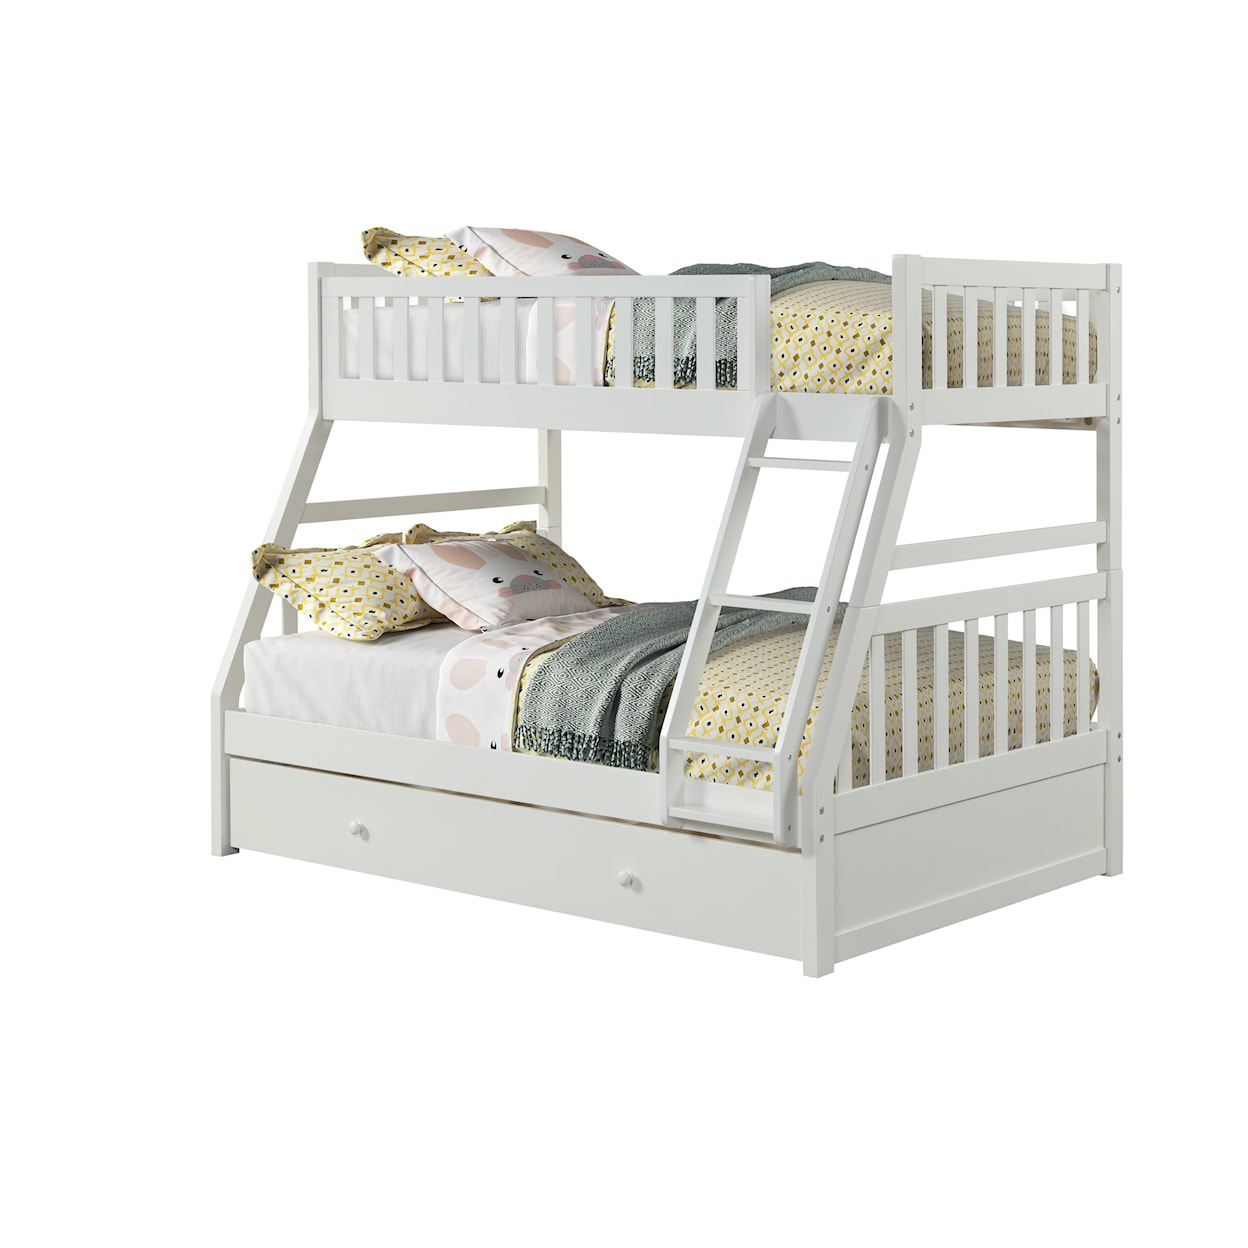 Alex's Furniture B803W Casual Twin Over Full Bunk Bed